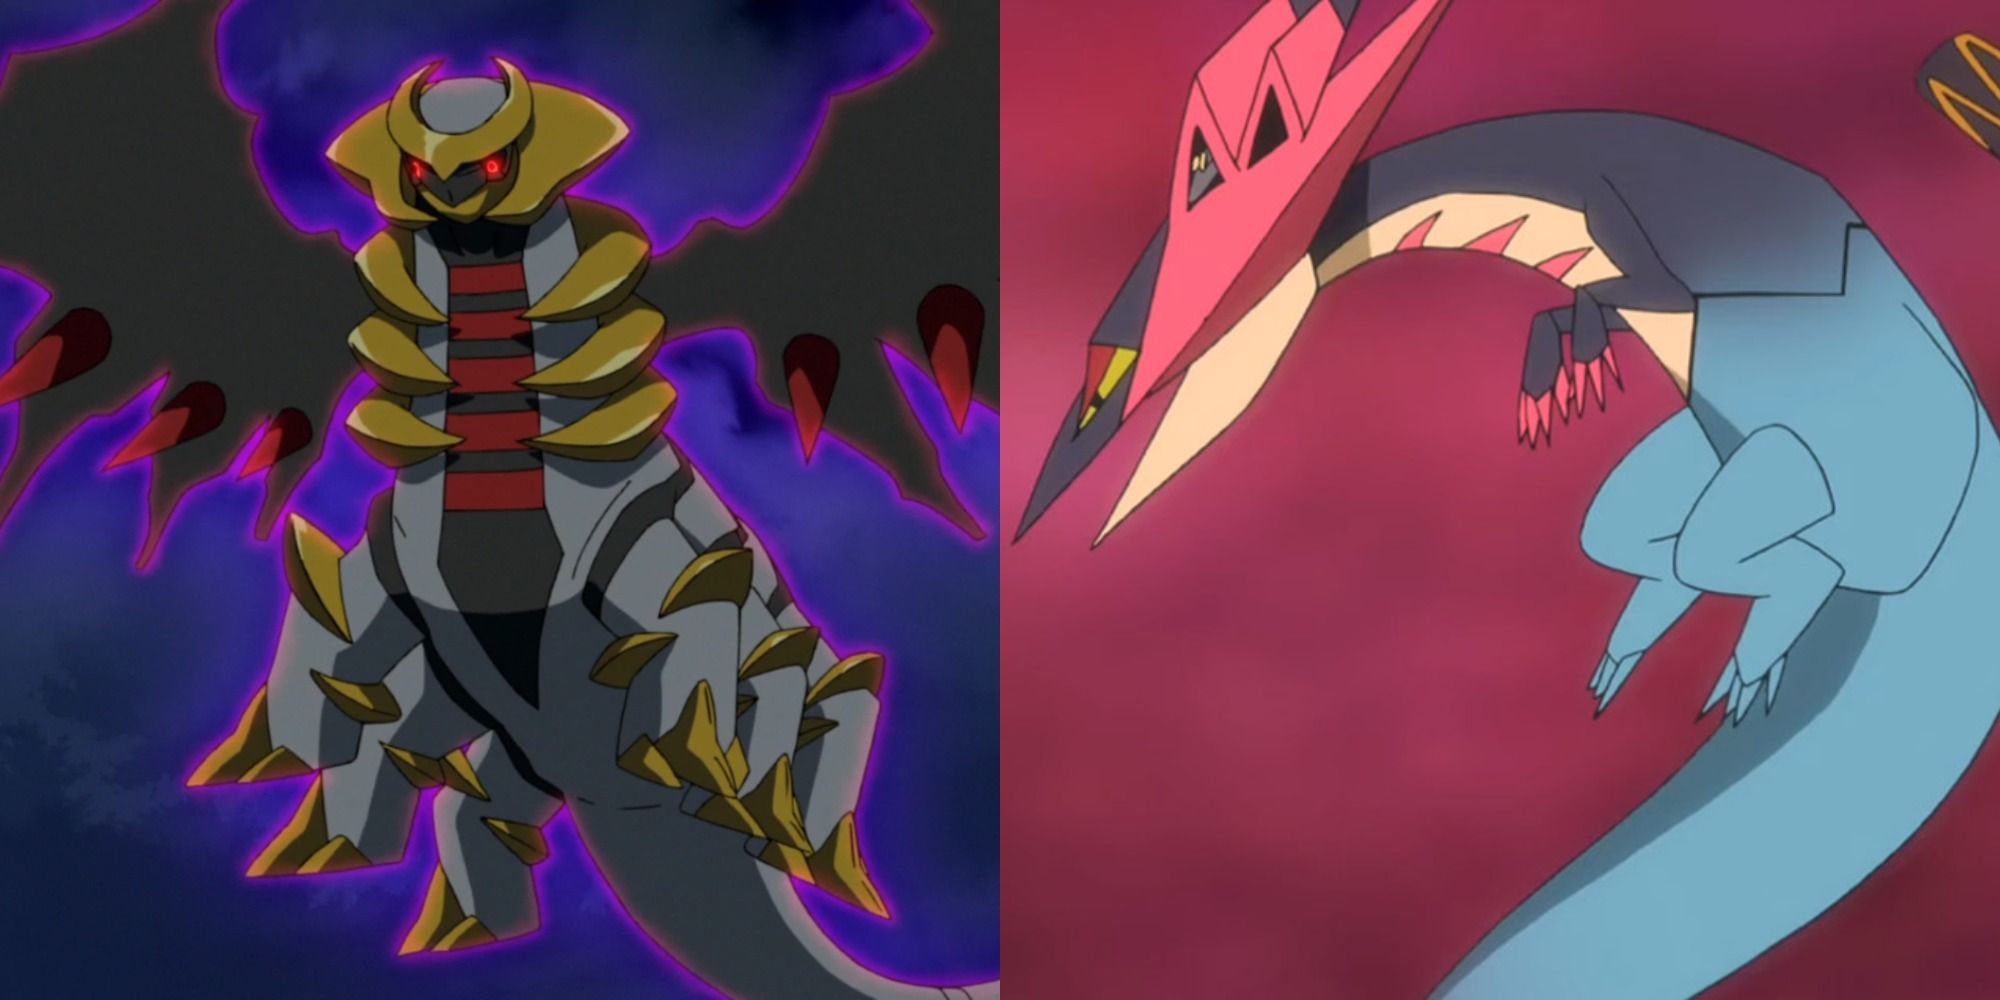 Split image showing Giratina and Dragapult in the Pokémon anime.